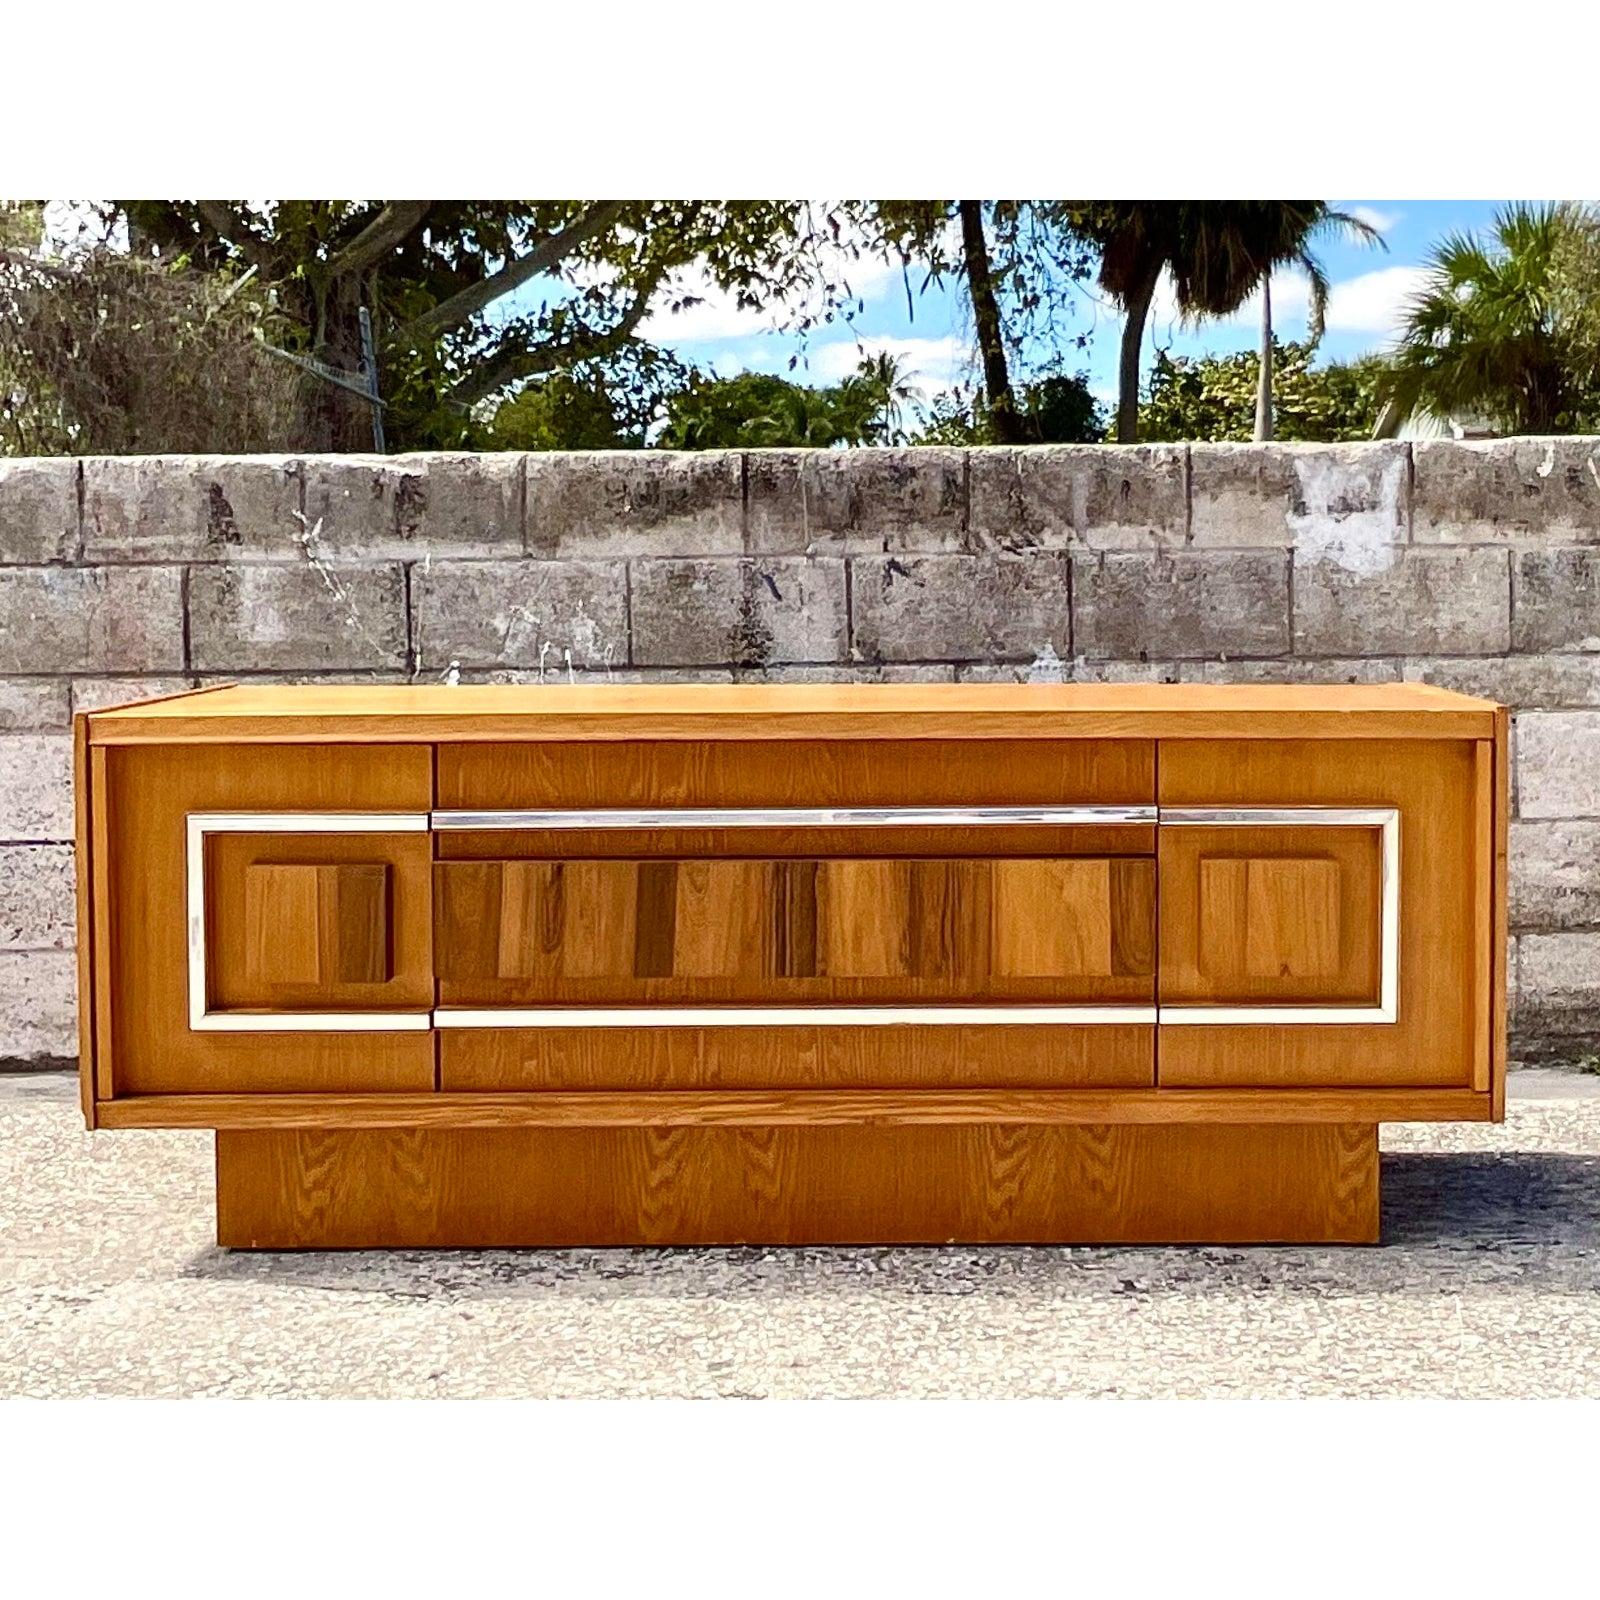 Chrome Vintage Mid-Century Modern Inset Wood Grain Panel Credenza For Sale